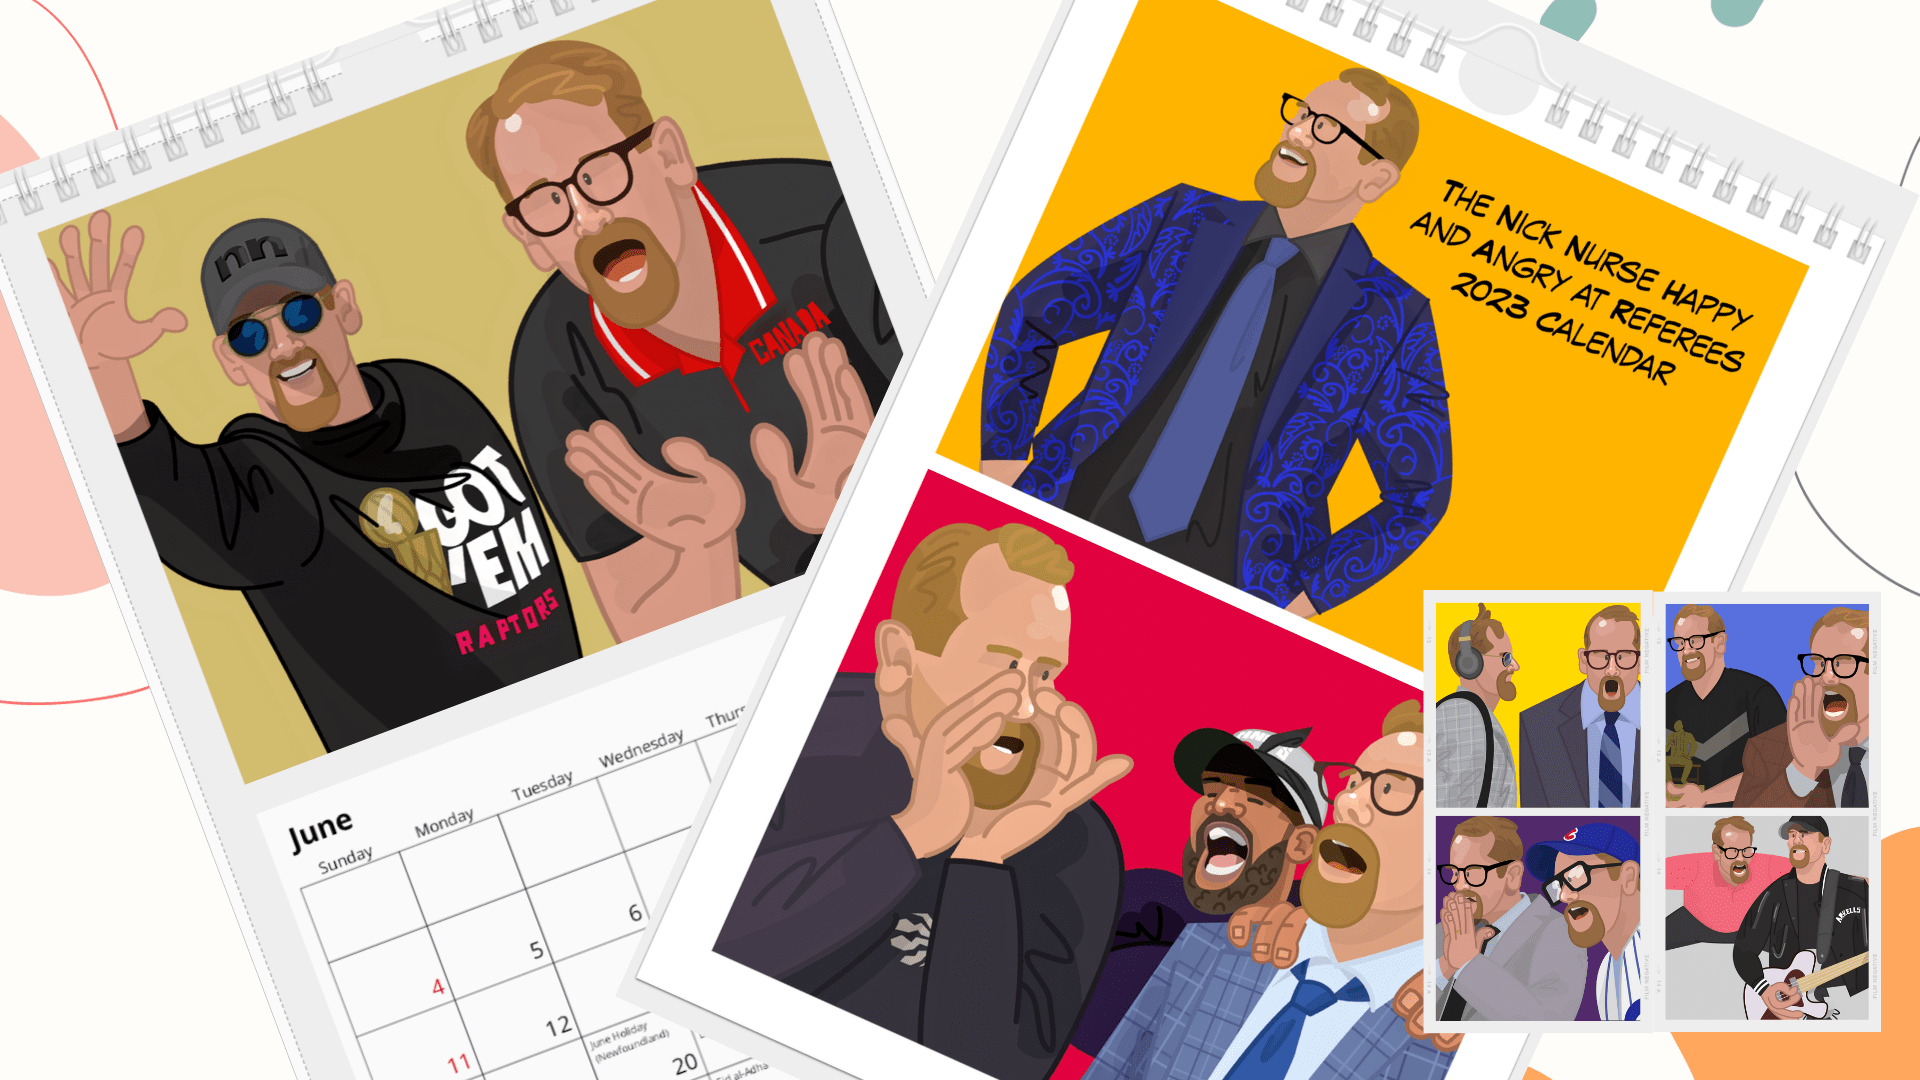 Available Now: Nick Nurse Happy and Angry at Referees 2023 Calendar